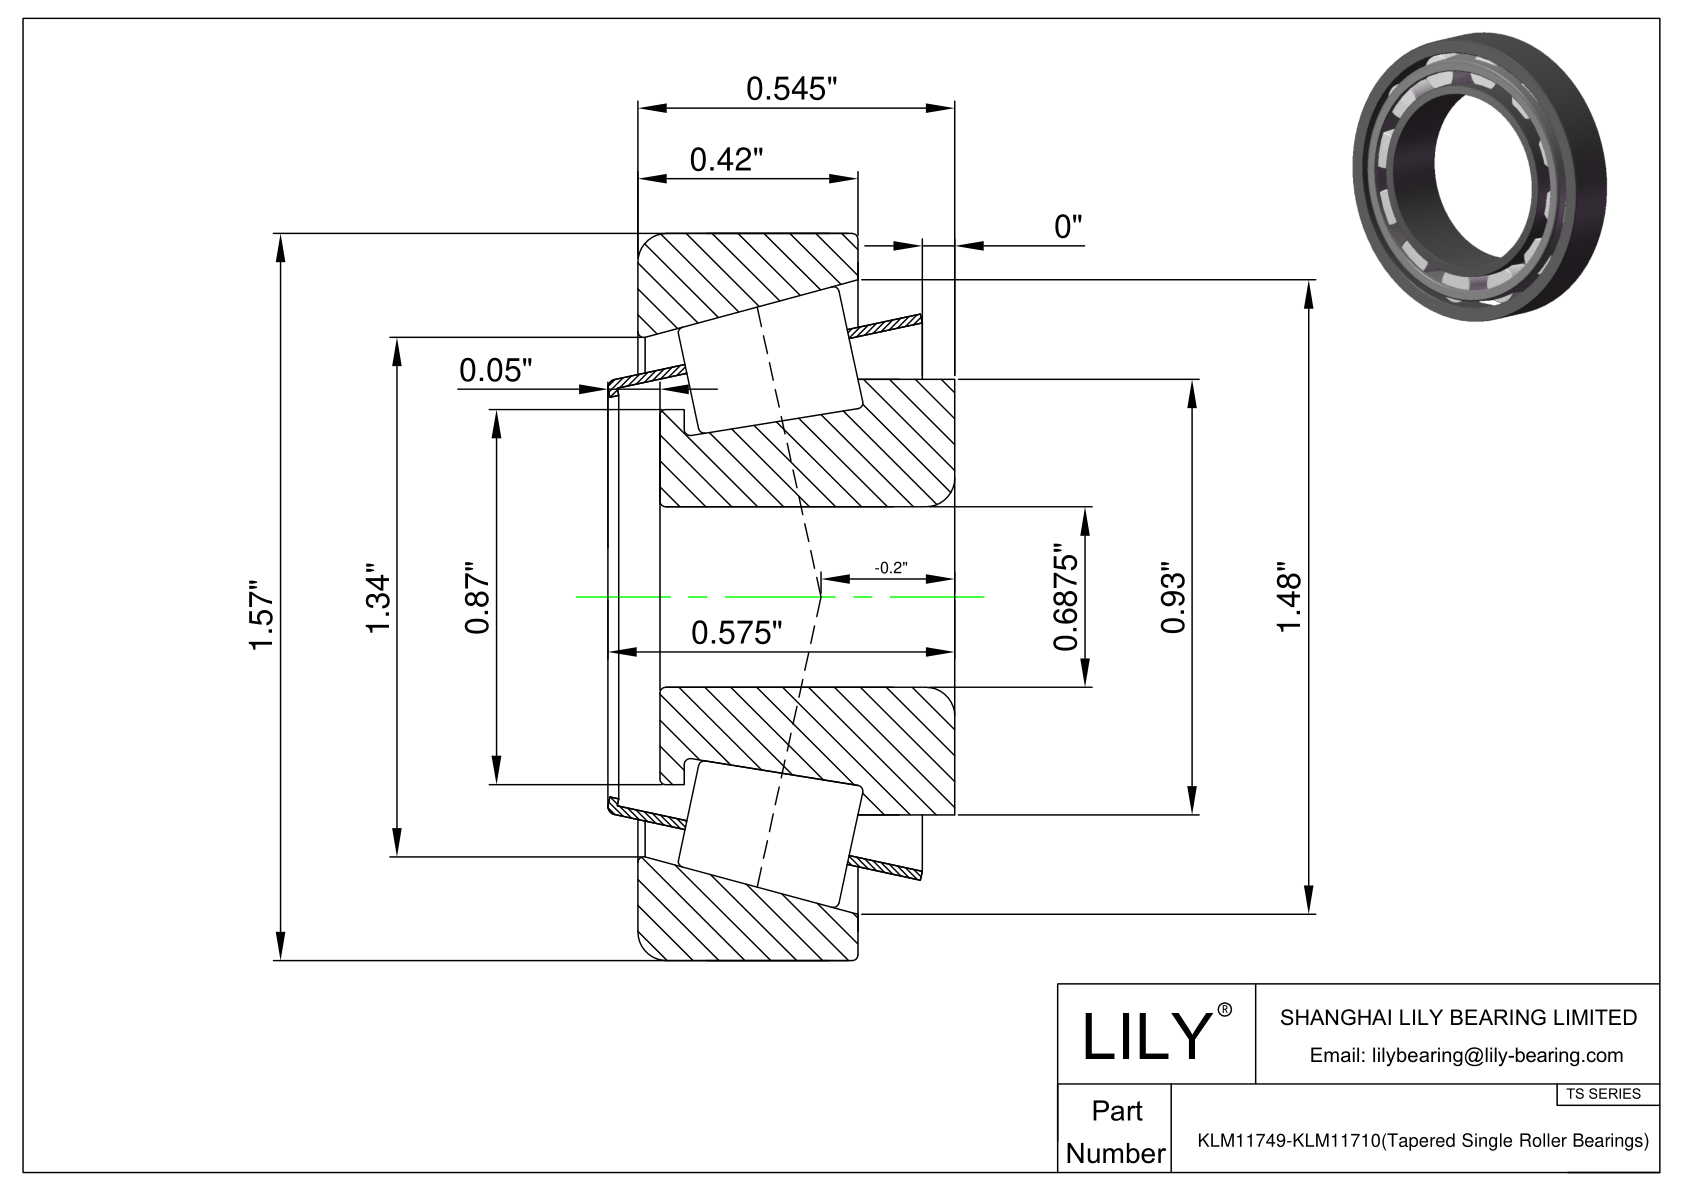 KLM11749-KLM11710 TS (Tapered Single Roller Bearings) (Imperial) cad drawing